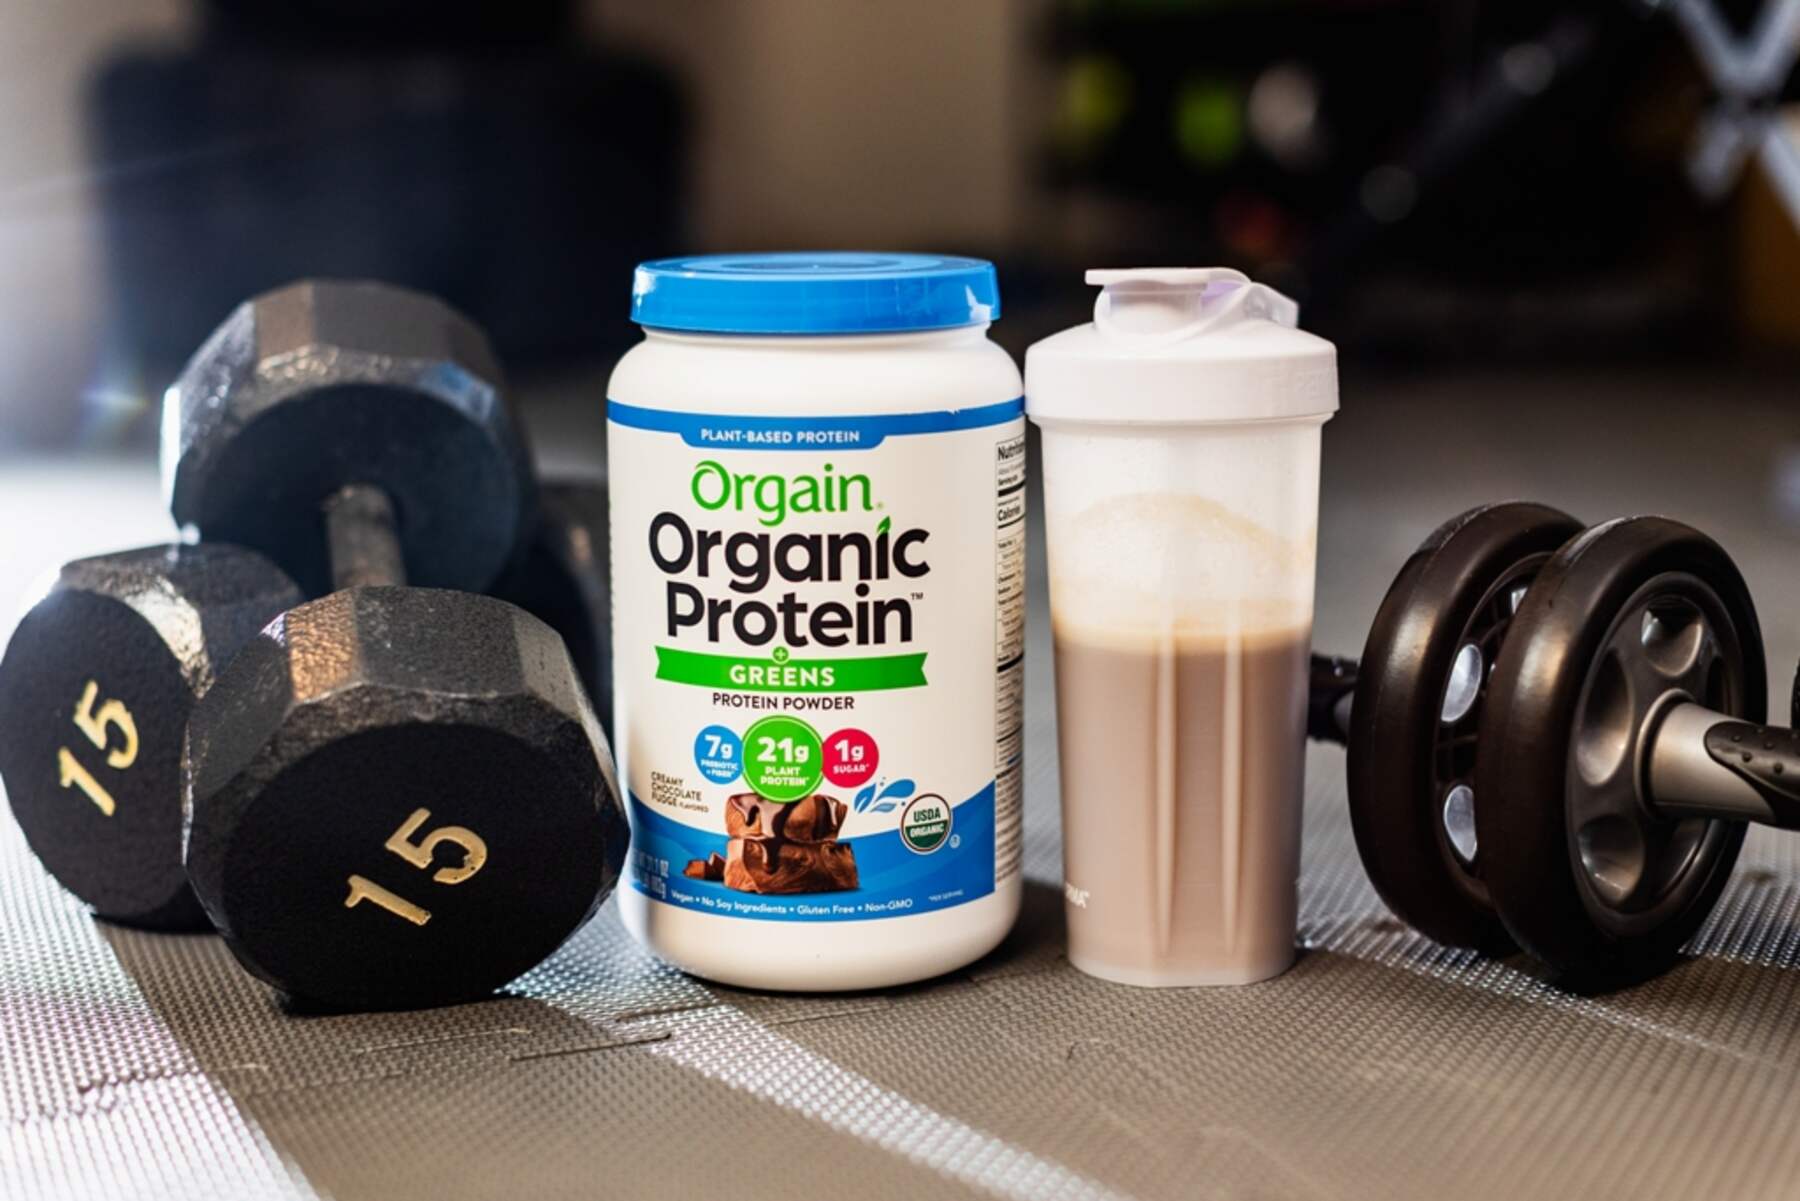 Orgain Protein & Greens Plant-Based Protein Powder bottle beside a pair of dumbbells and a water bottle filled with protein shake